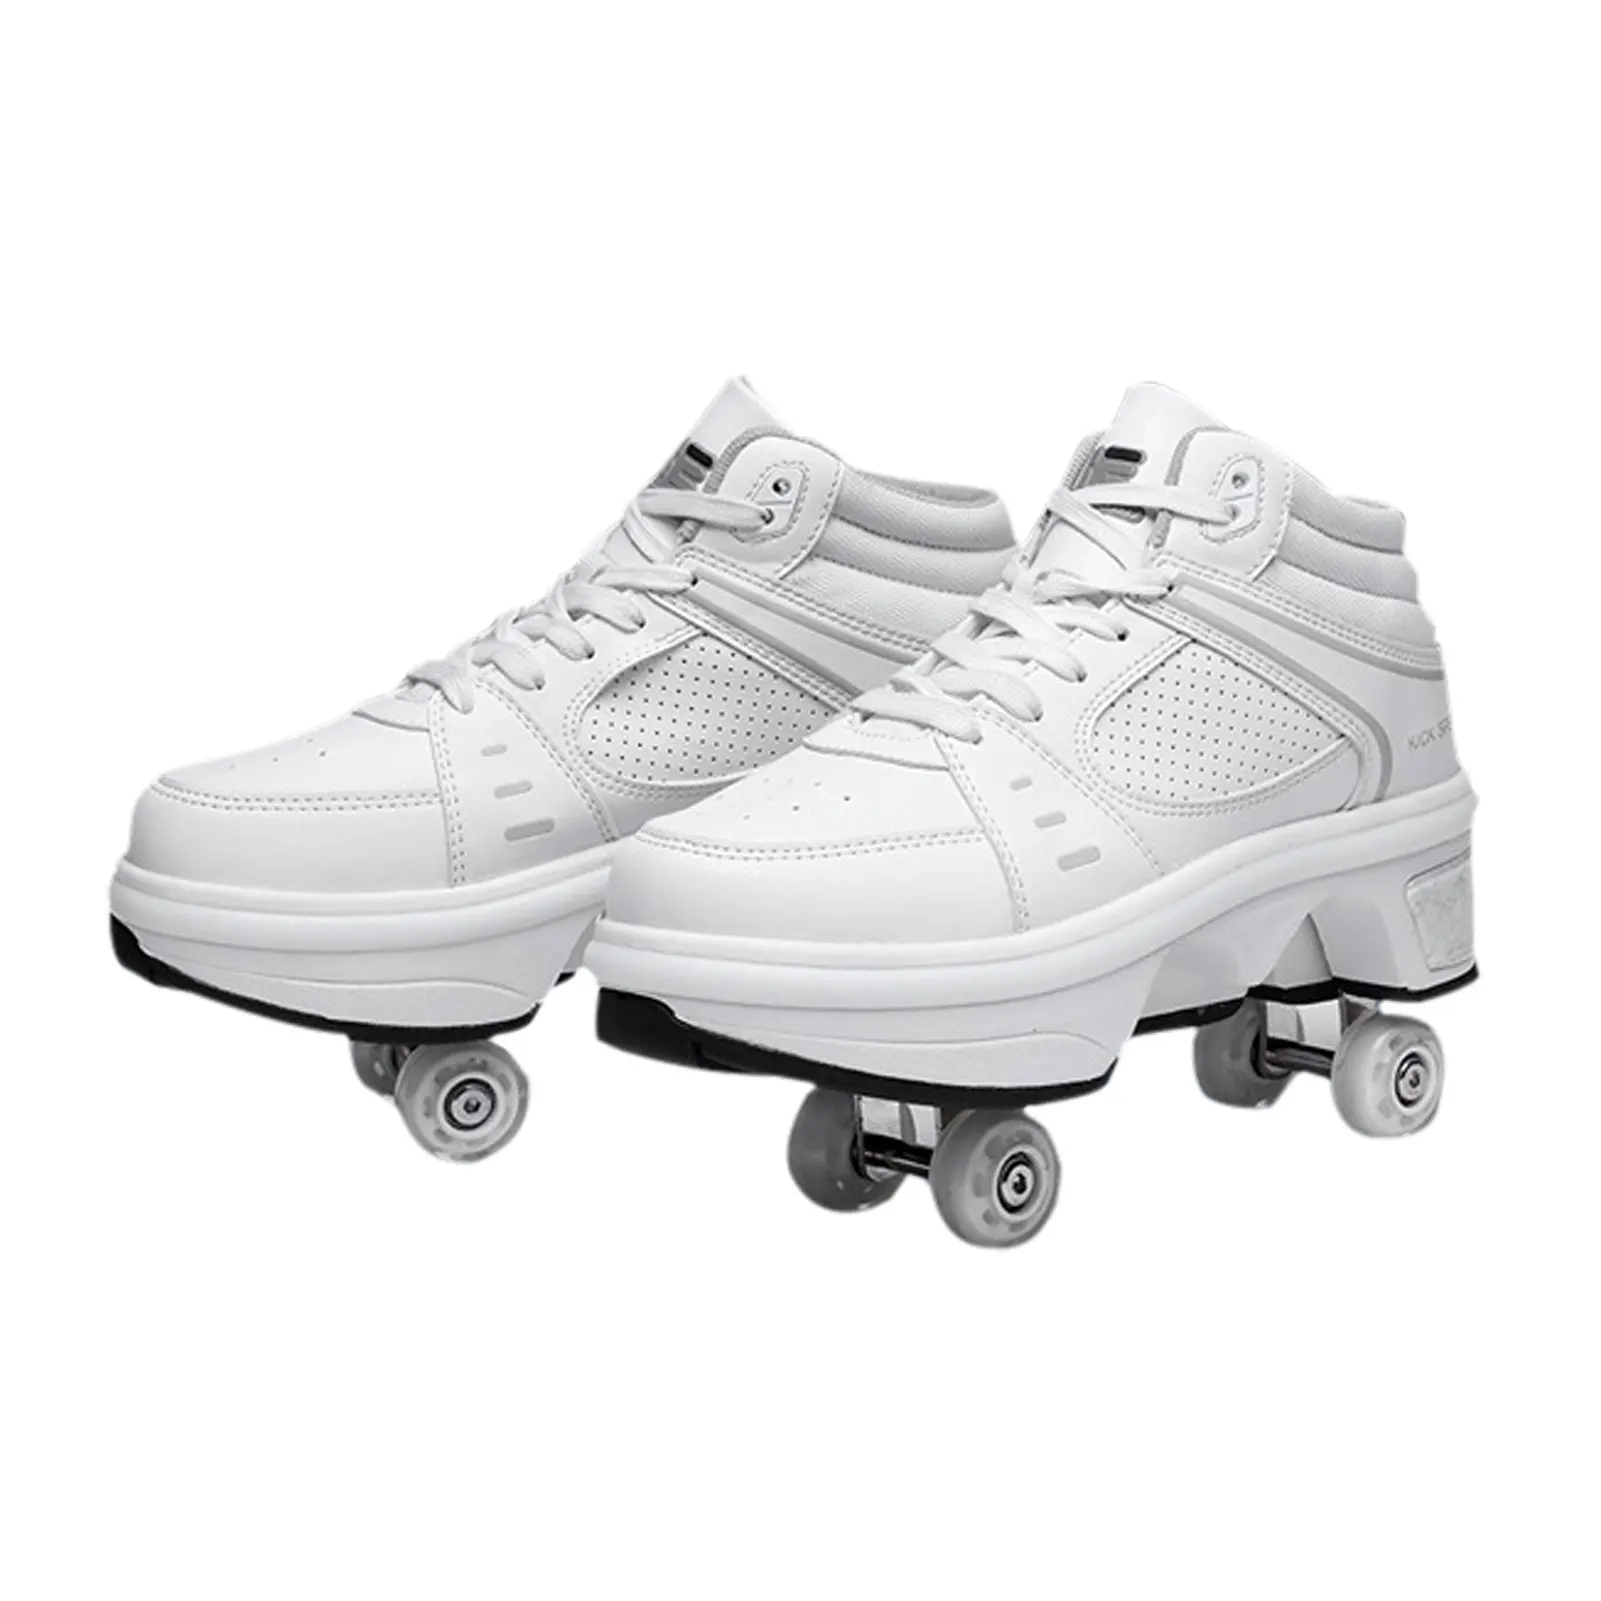 4 Wheeled Shoes Swivel Wheel Deformation Parkour Retractable Roller Skates 2 Row 